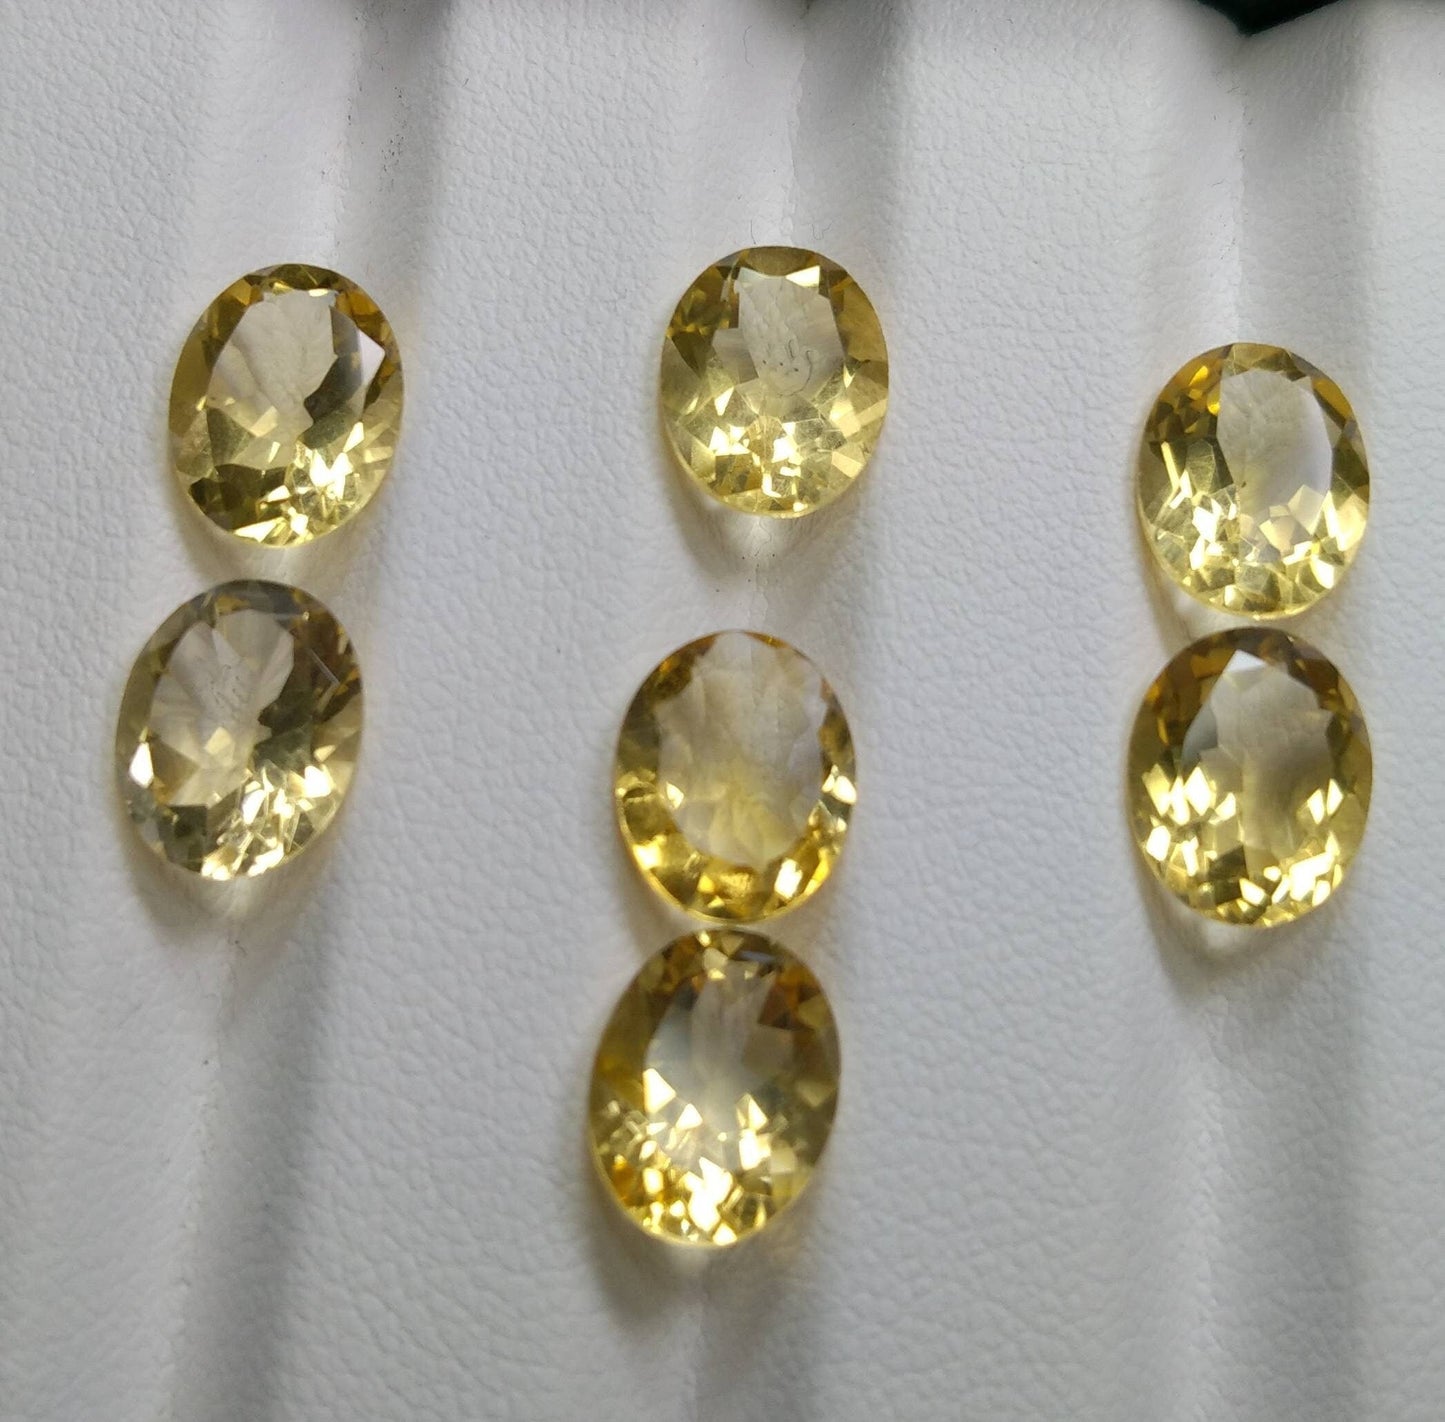 ARSAA GEMS AND MINERALSNatural fine quality beautiful 16 carats small lot of faceted calibrated oval shapes eye clean Clarity yellow citrine gems - Premium  from ARSAA GEMS AND MINERALS - Just $50.00! Shop now at ARSAA GEMS AND MINERALS